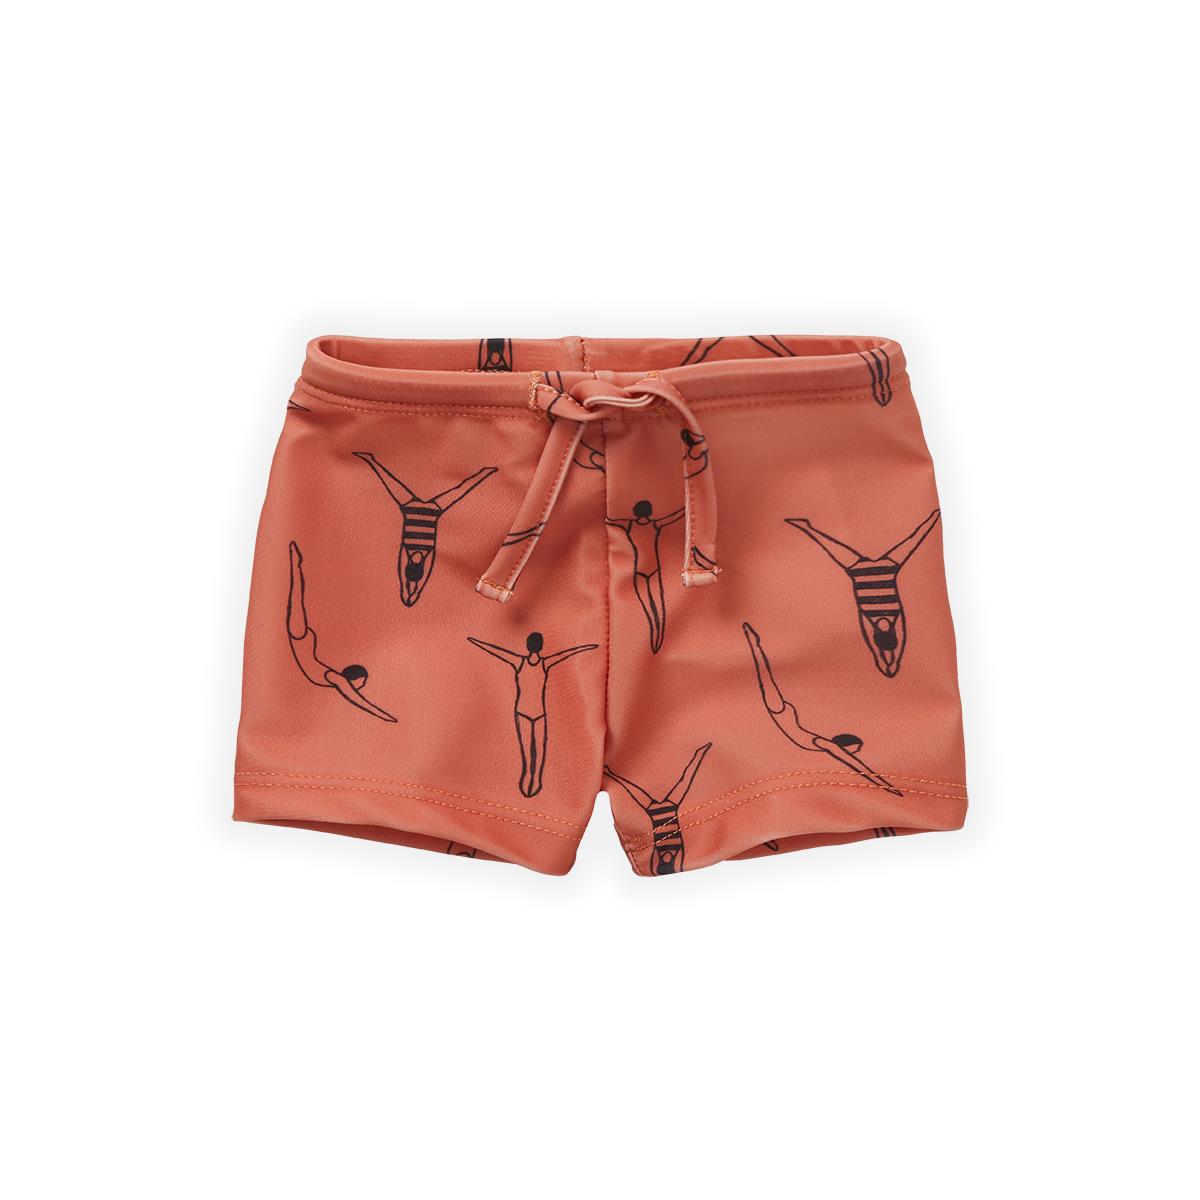 Sproet & Sprout - Swim pants swimmer print